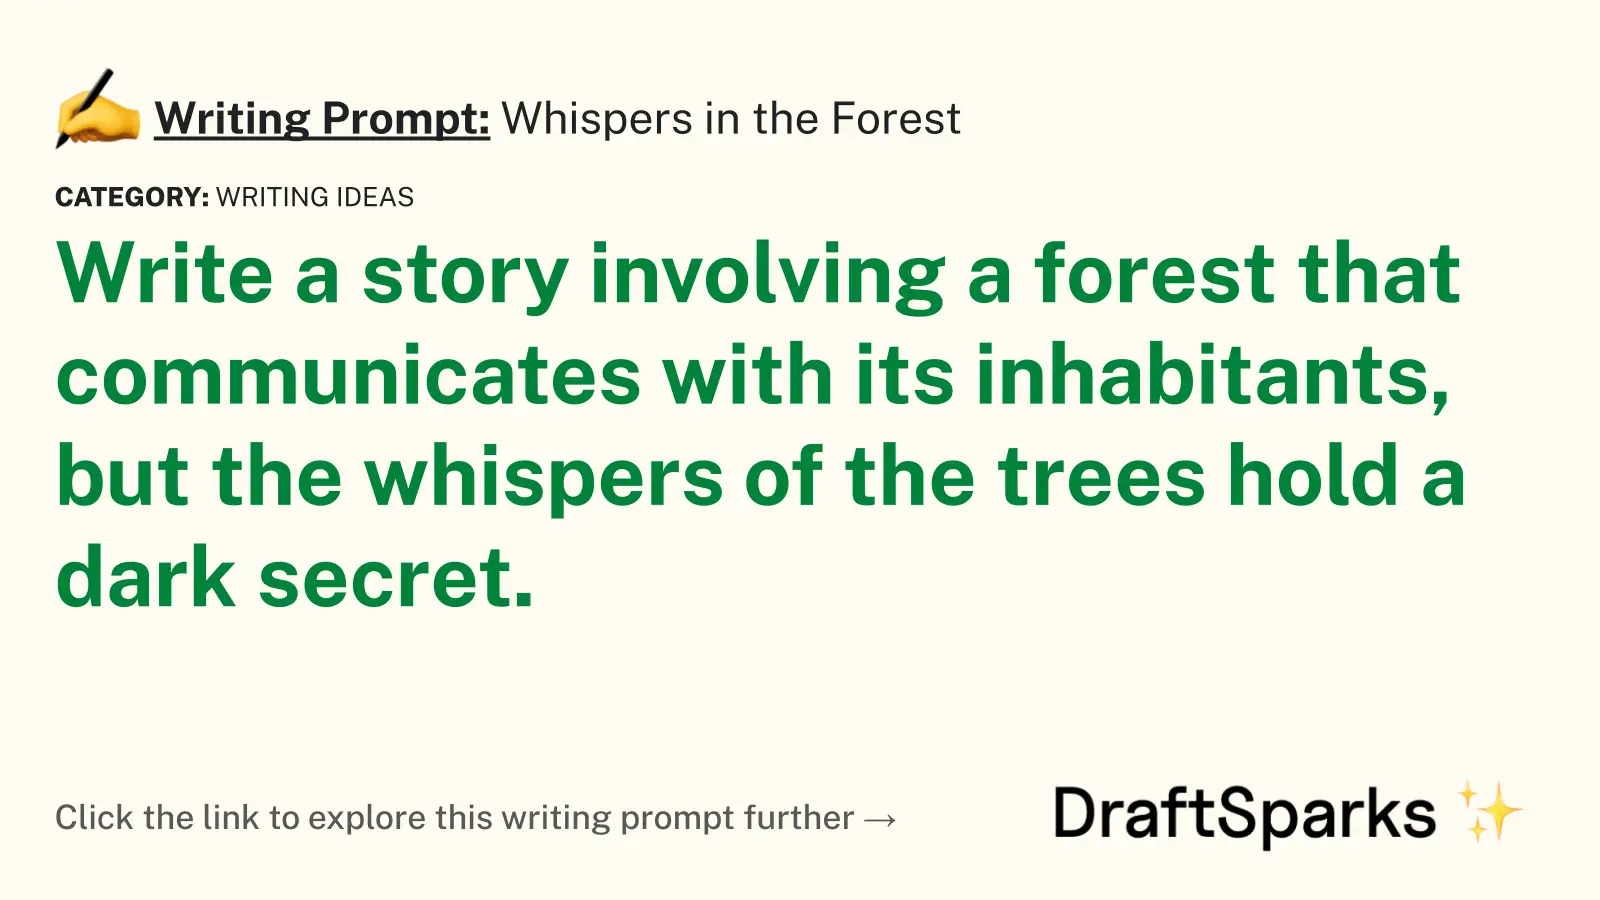 Whispers in the Forest